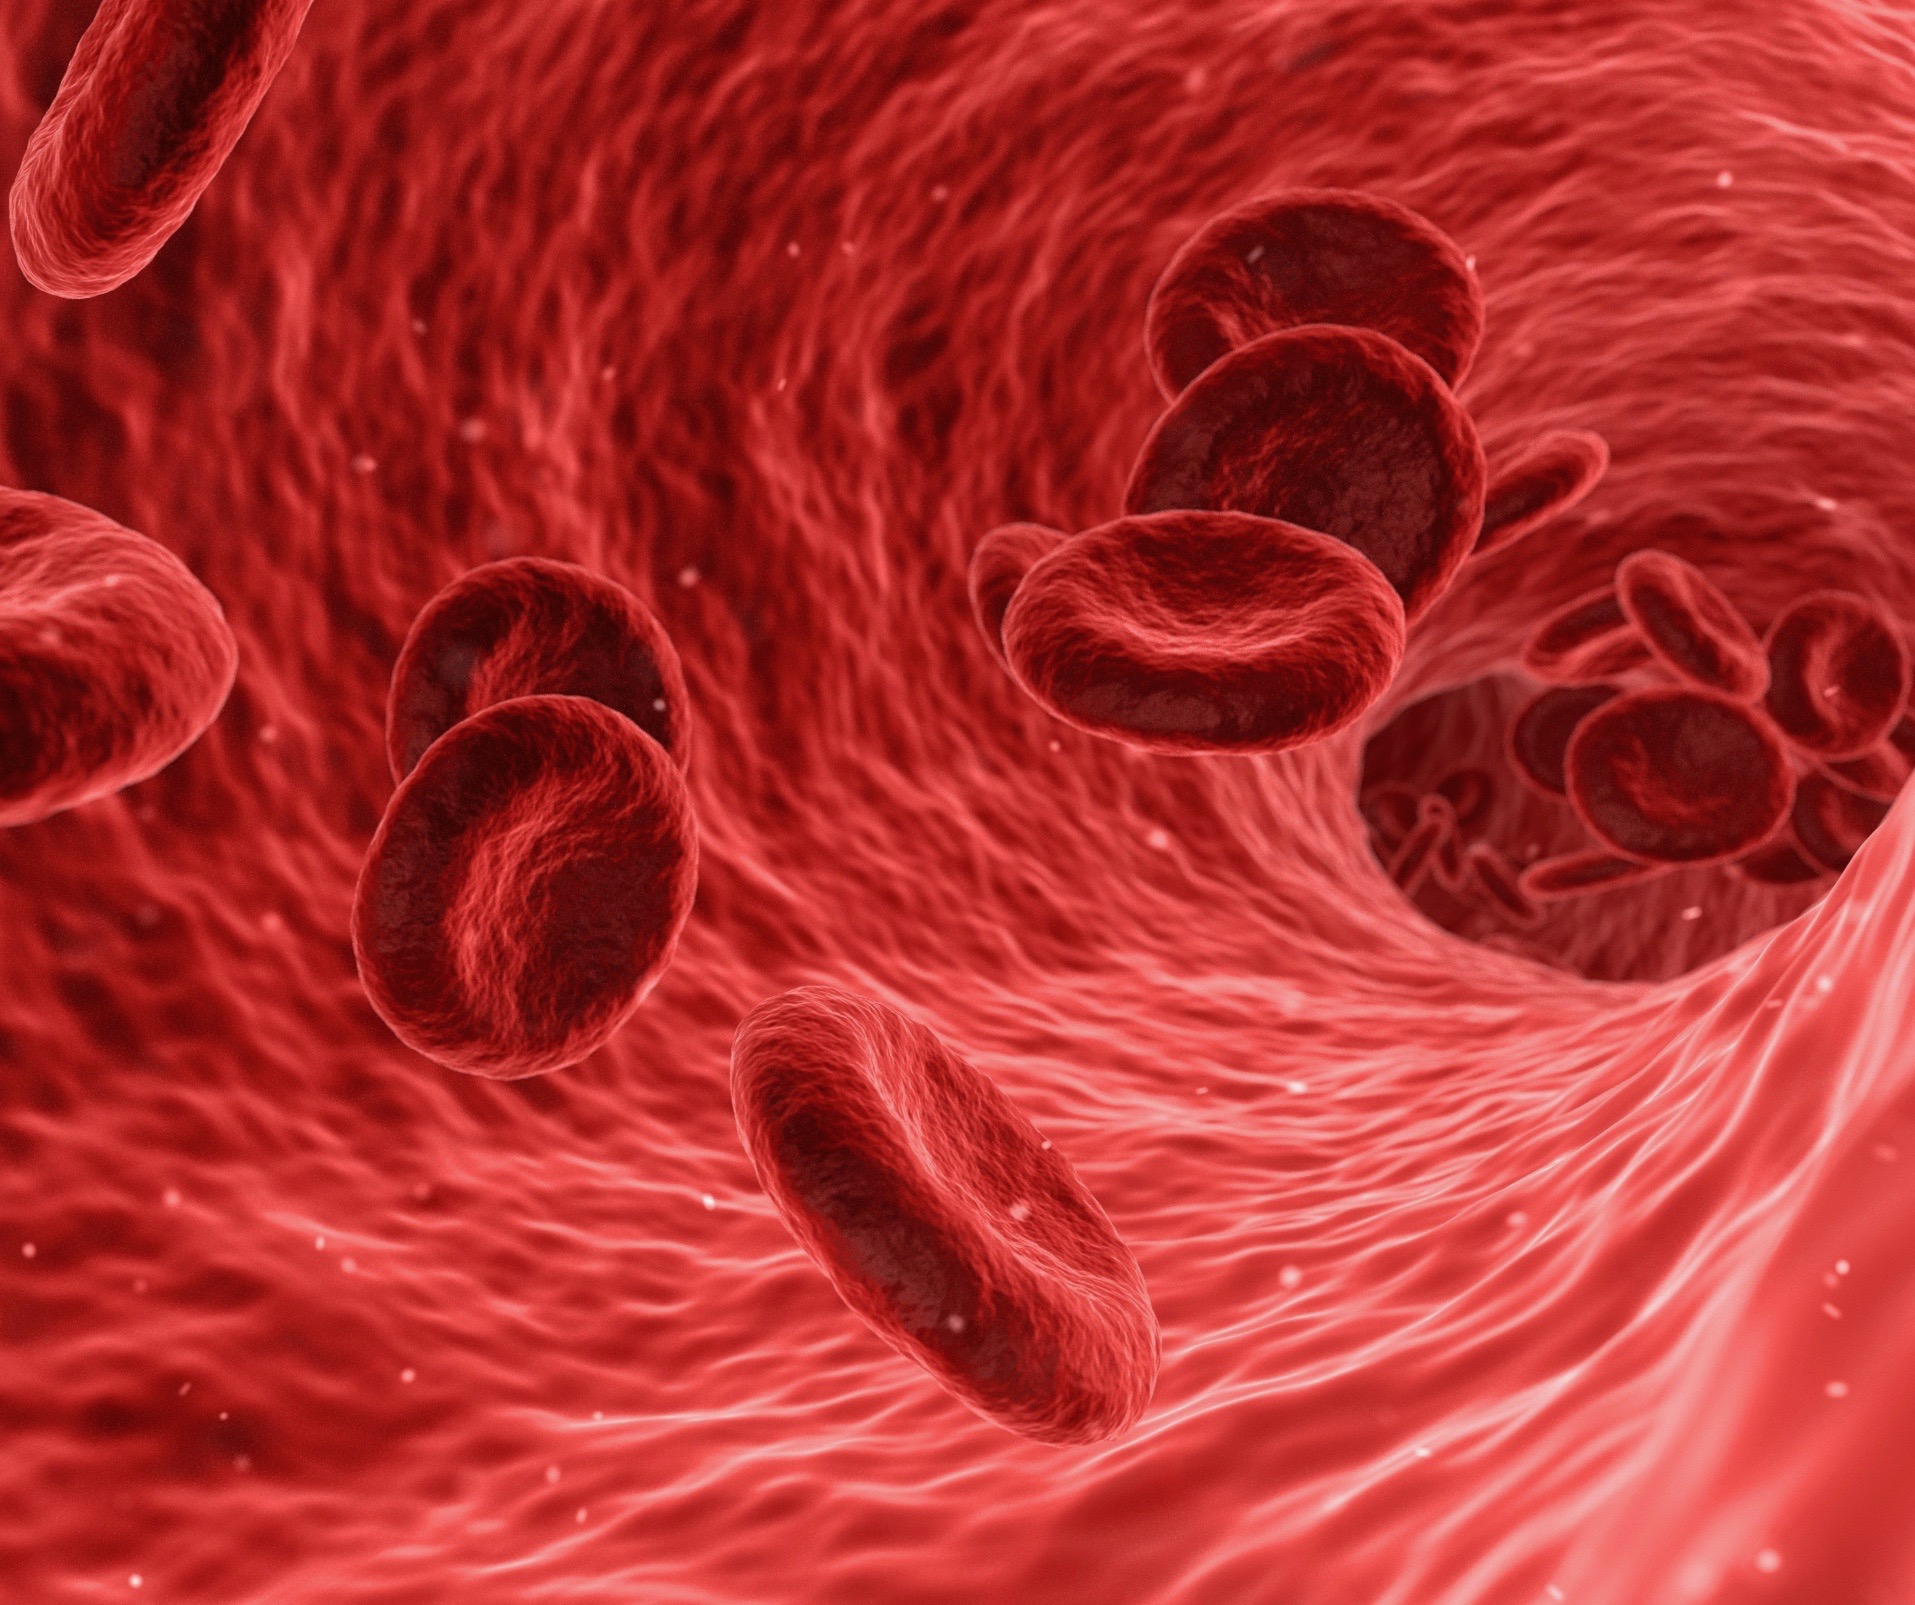 Picture of red blood cells